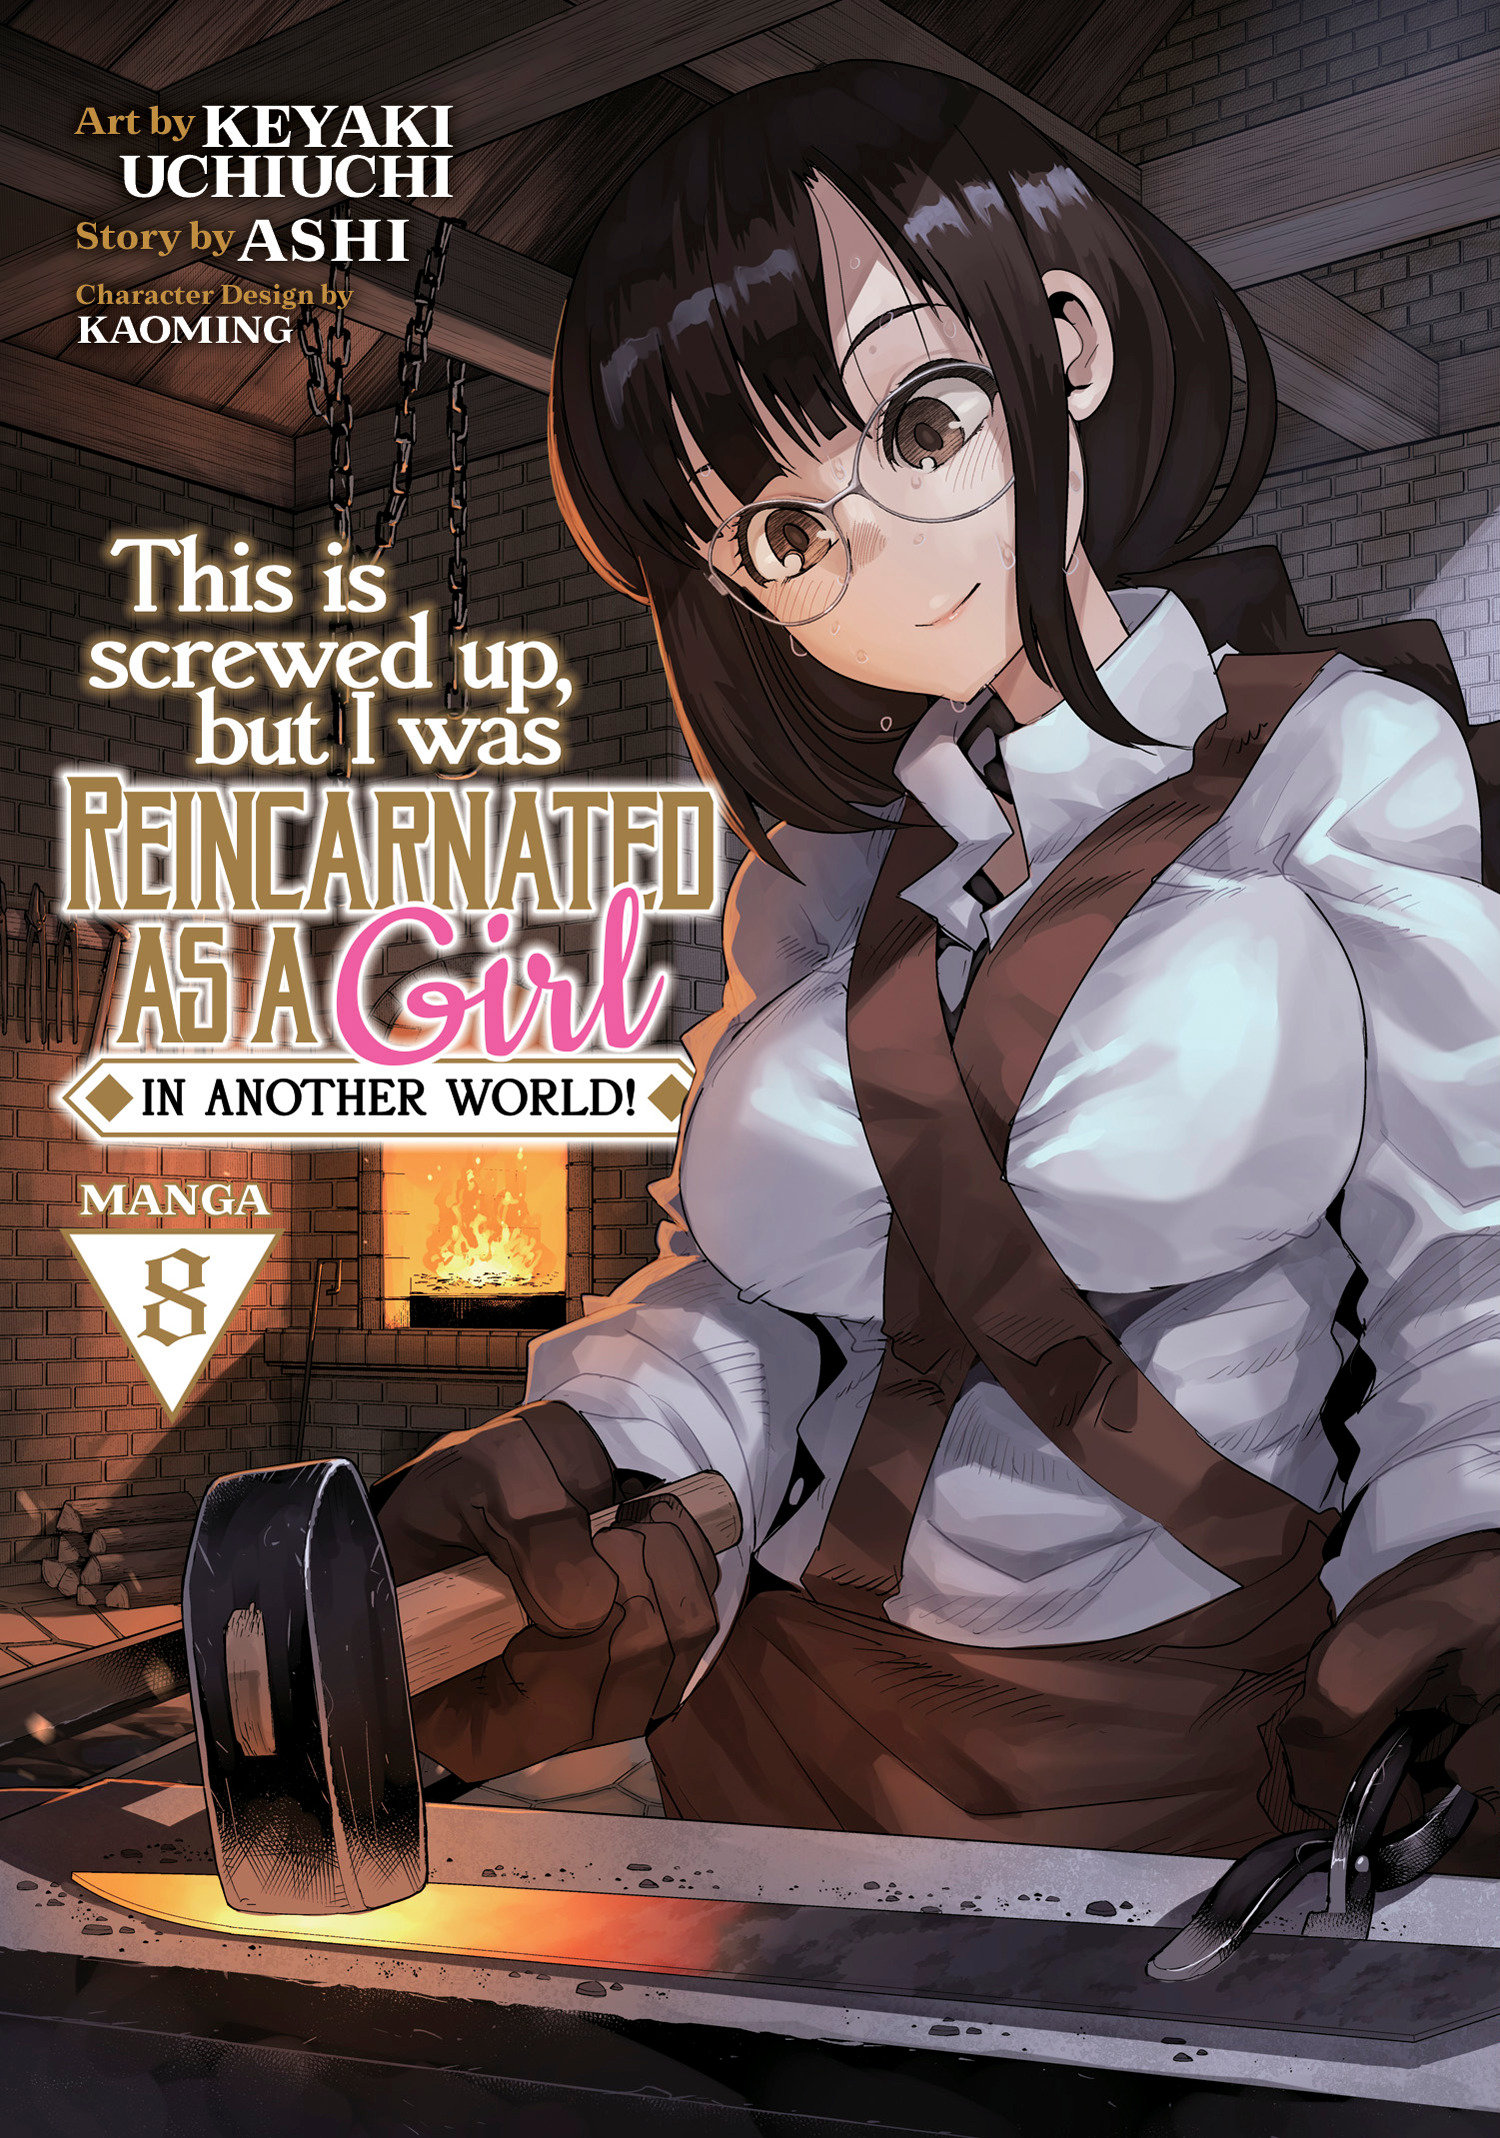 This is Screwed Up, But I Was Reincarnated as a Girl in Another World! Manga Volume 8